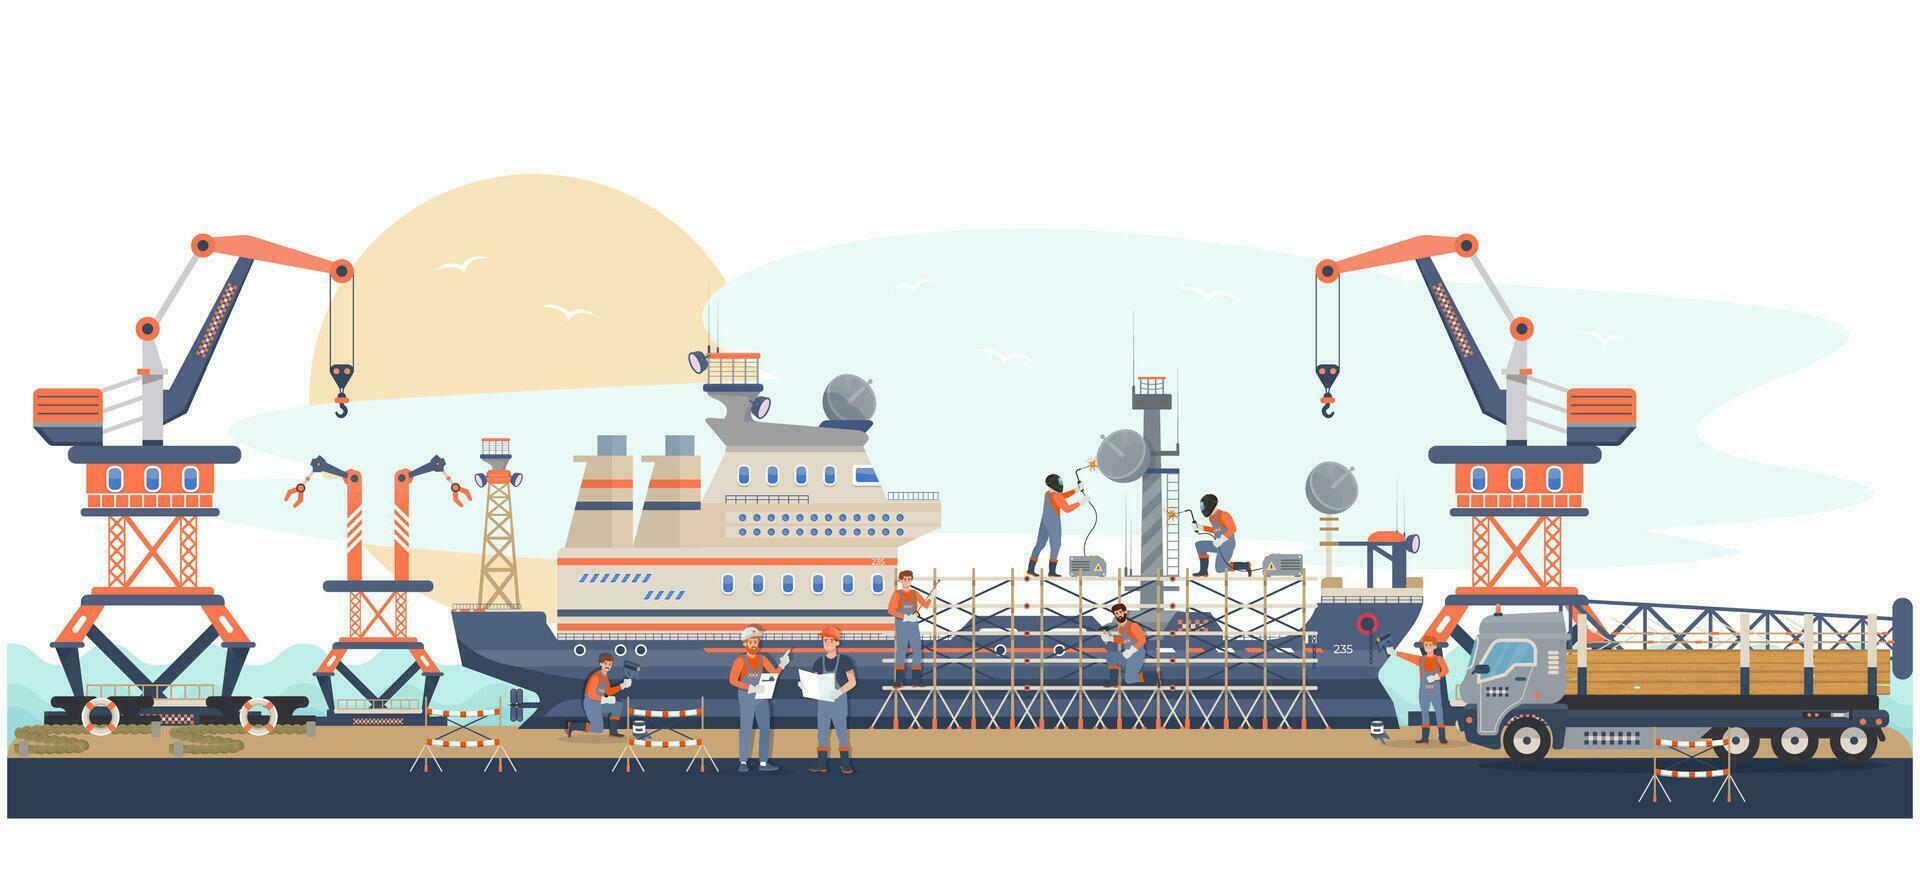 Shipbuilding site. Workers building ship in the dock. Engineers men welding metal structures, painting a vessel. Scaffolds on the ship. Shipbuilding company. Marine industry. Flat vector illustration.